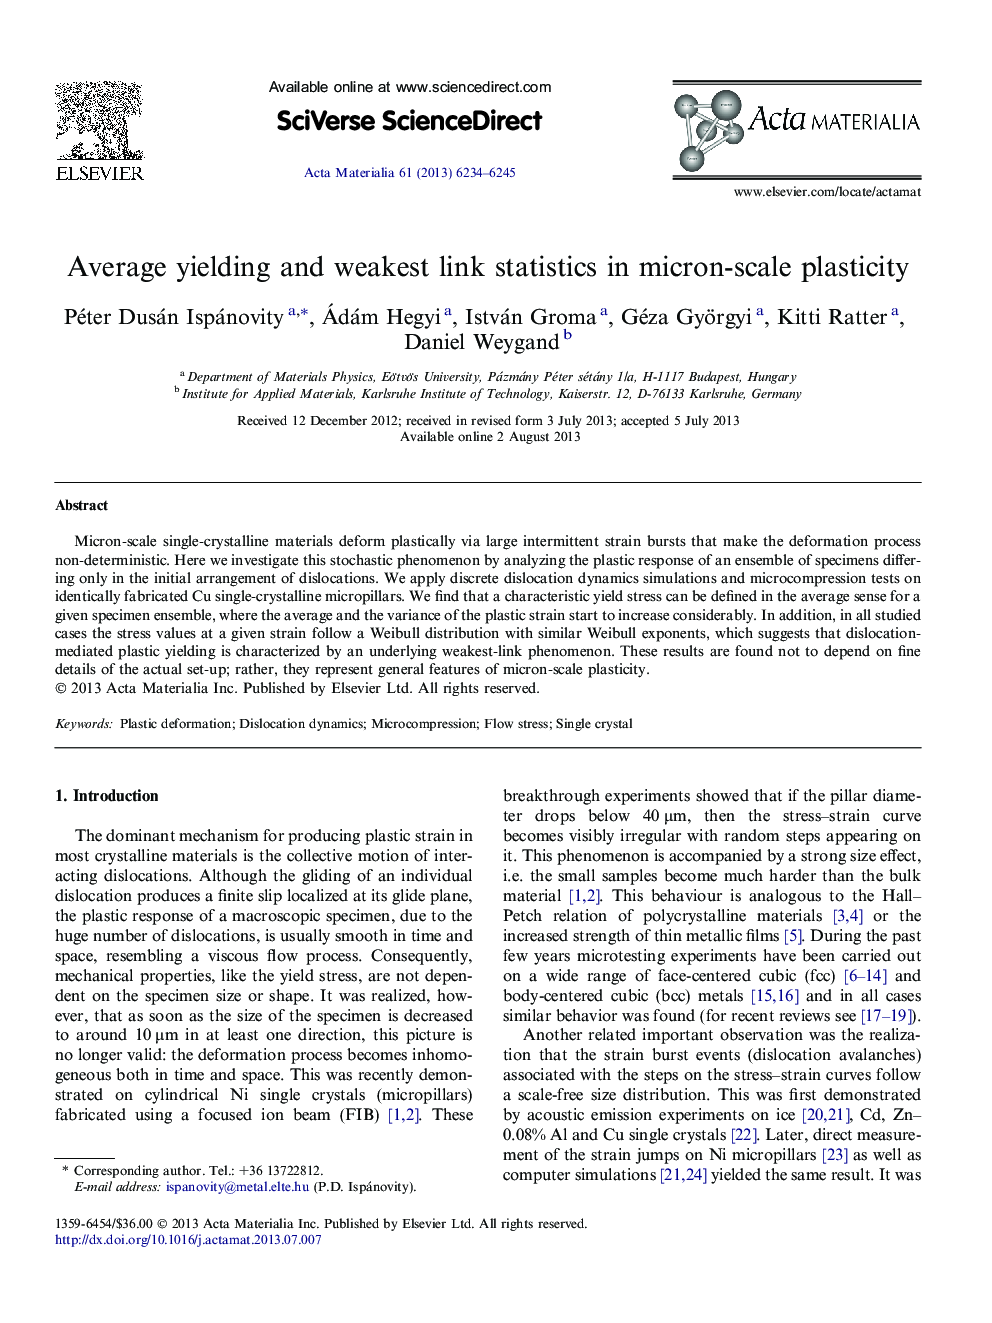 Average yielding and weakest link statistics in micron-scale plasticity